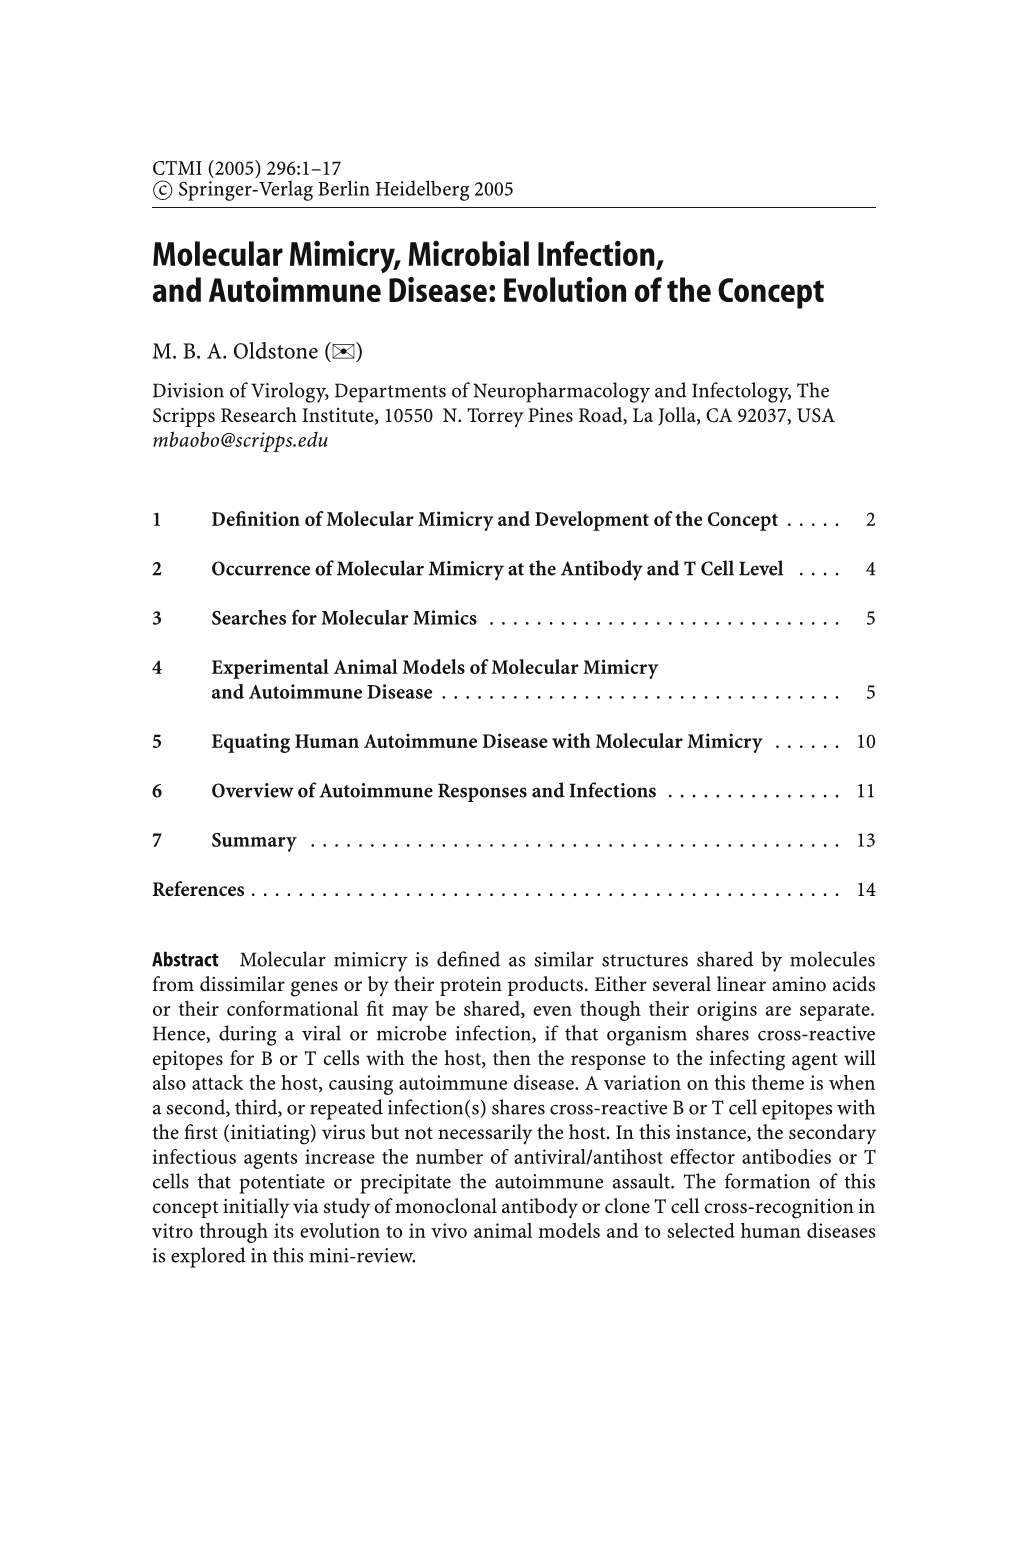 Molecular Mimicry, Microbial Infection, and Autoimmune Disease: Evolution of the Concept